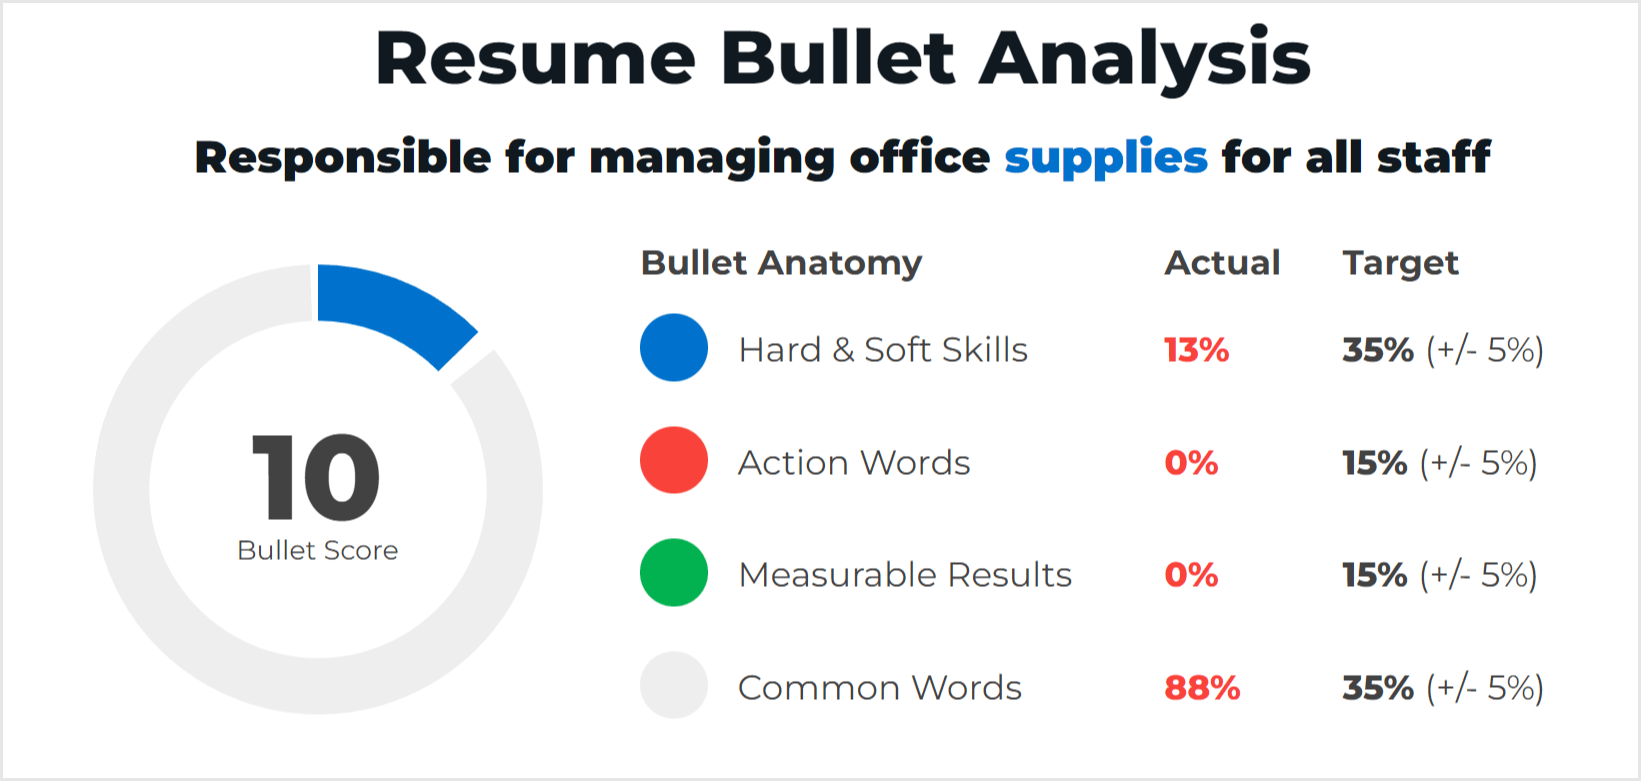 Bad Administrative Assistant Resume Bullet Example